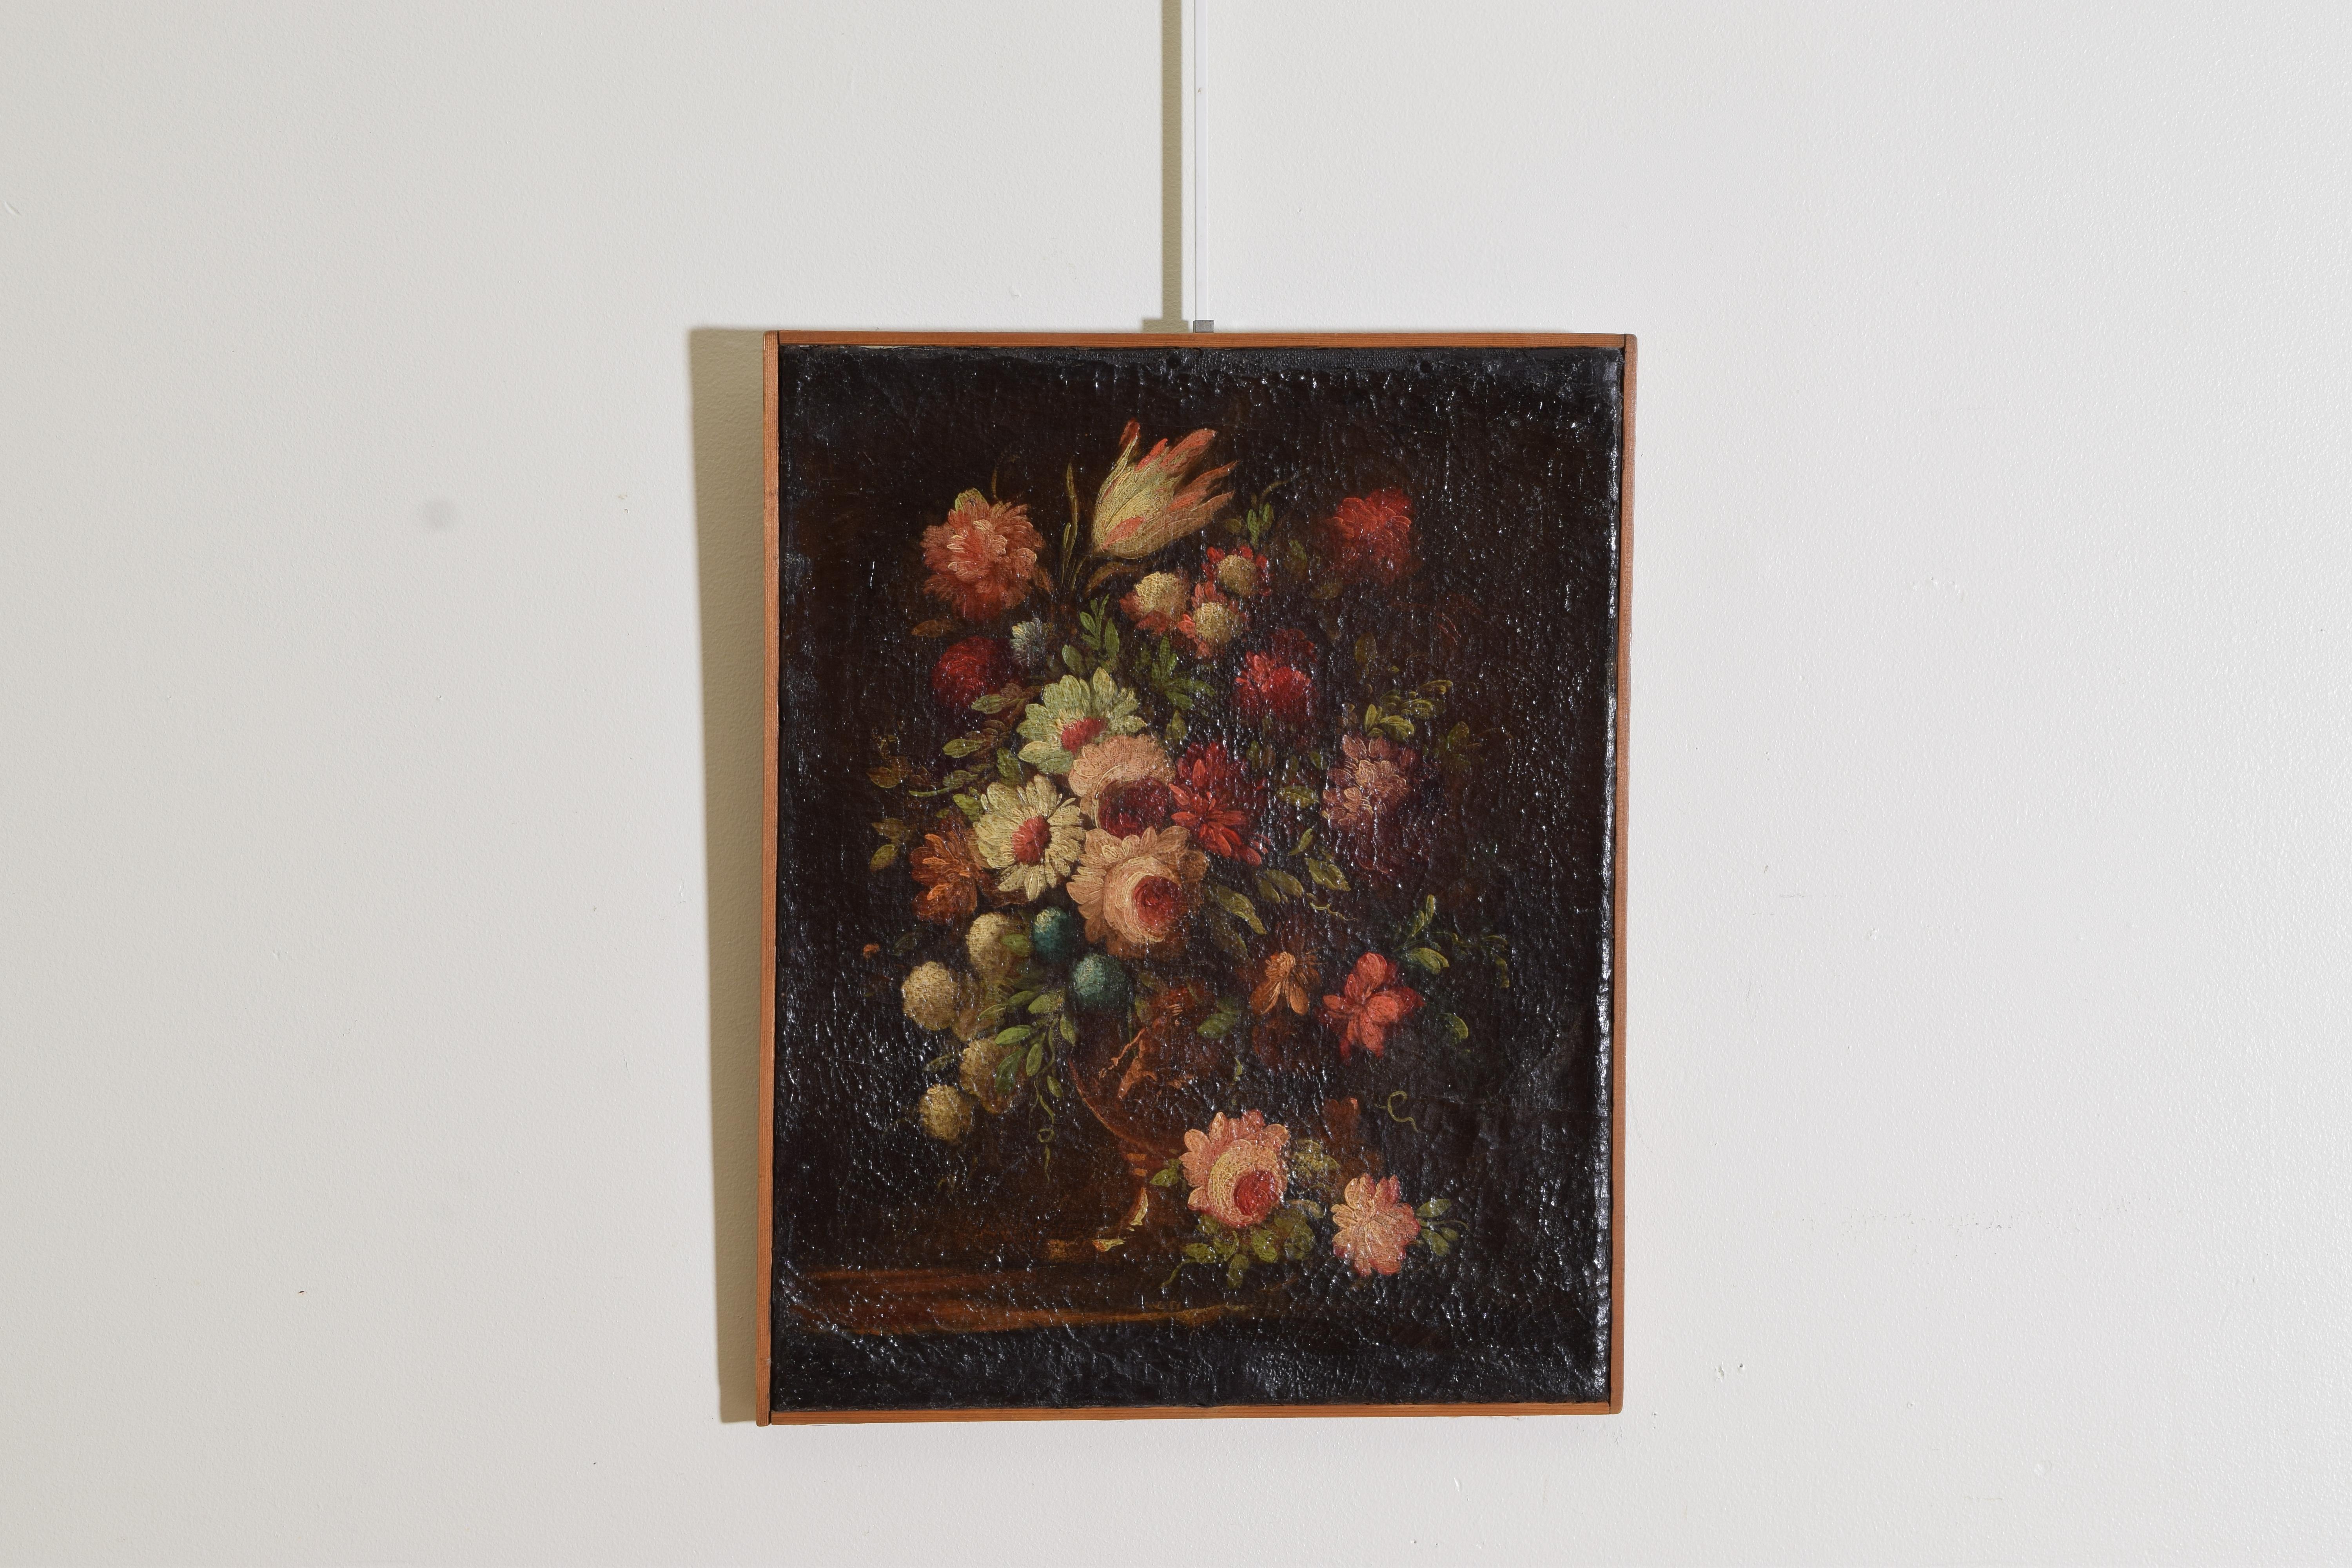 The floral bouquet a beautiful assortment of rich colors in a figural painted urn with a shadowy background, unframed